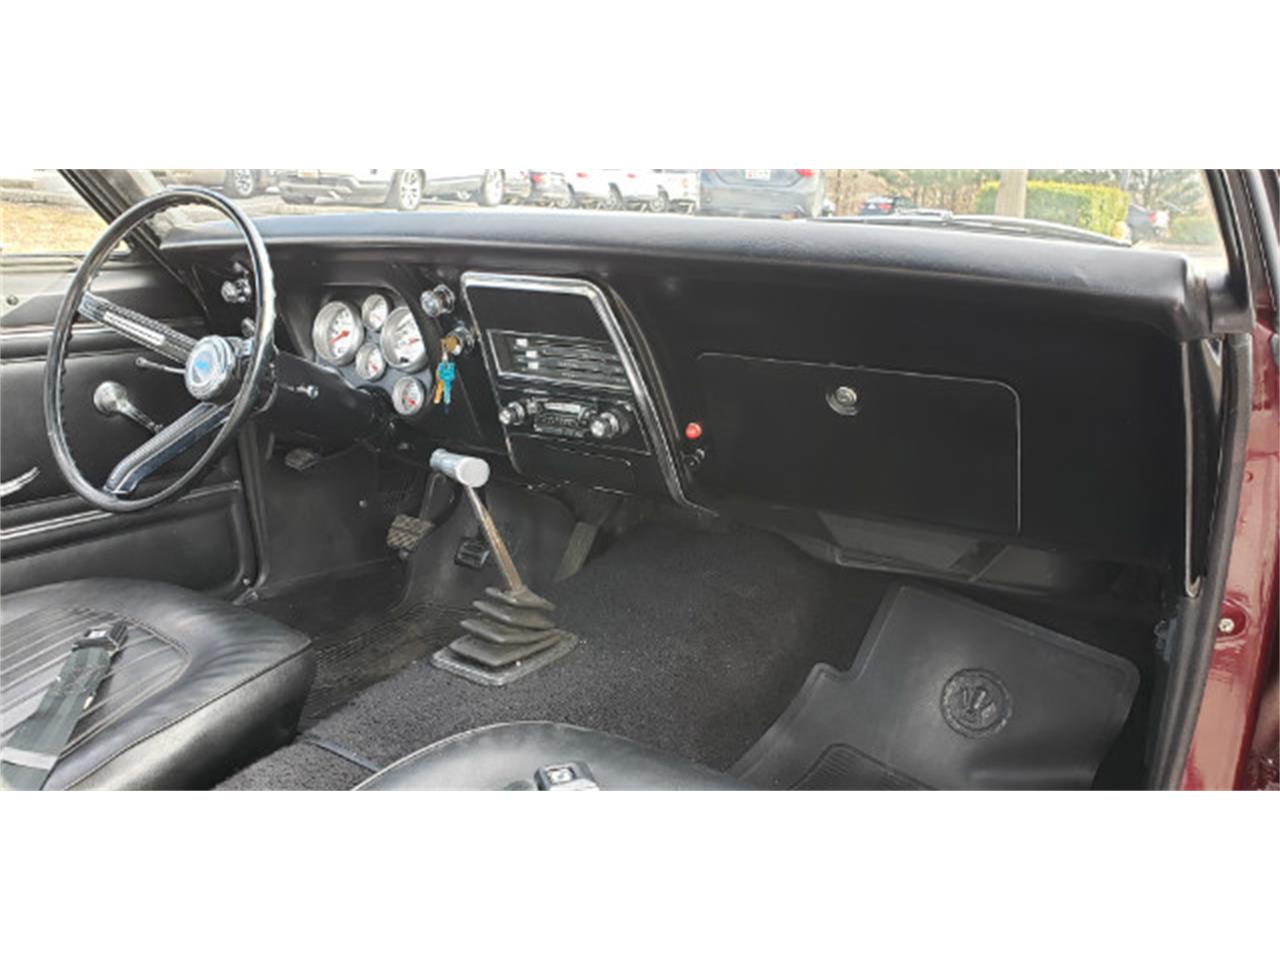 1967 Chevrolet Camaro For Sale In Linthicum Md